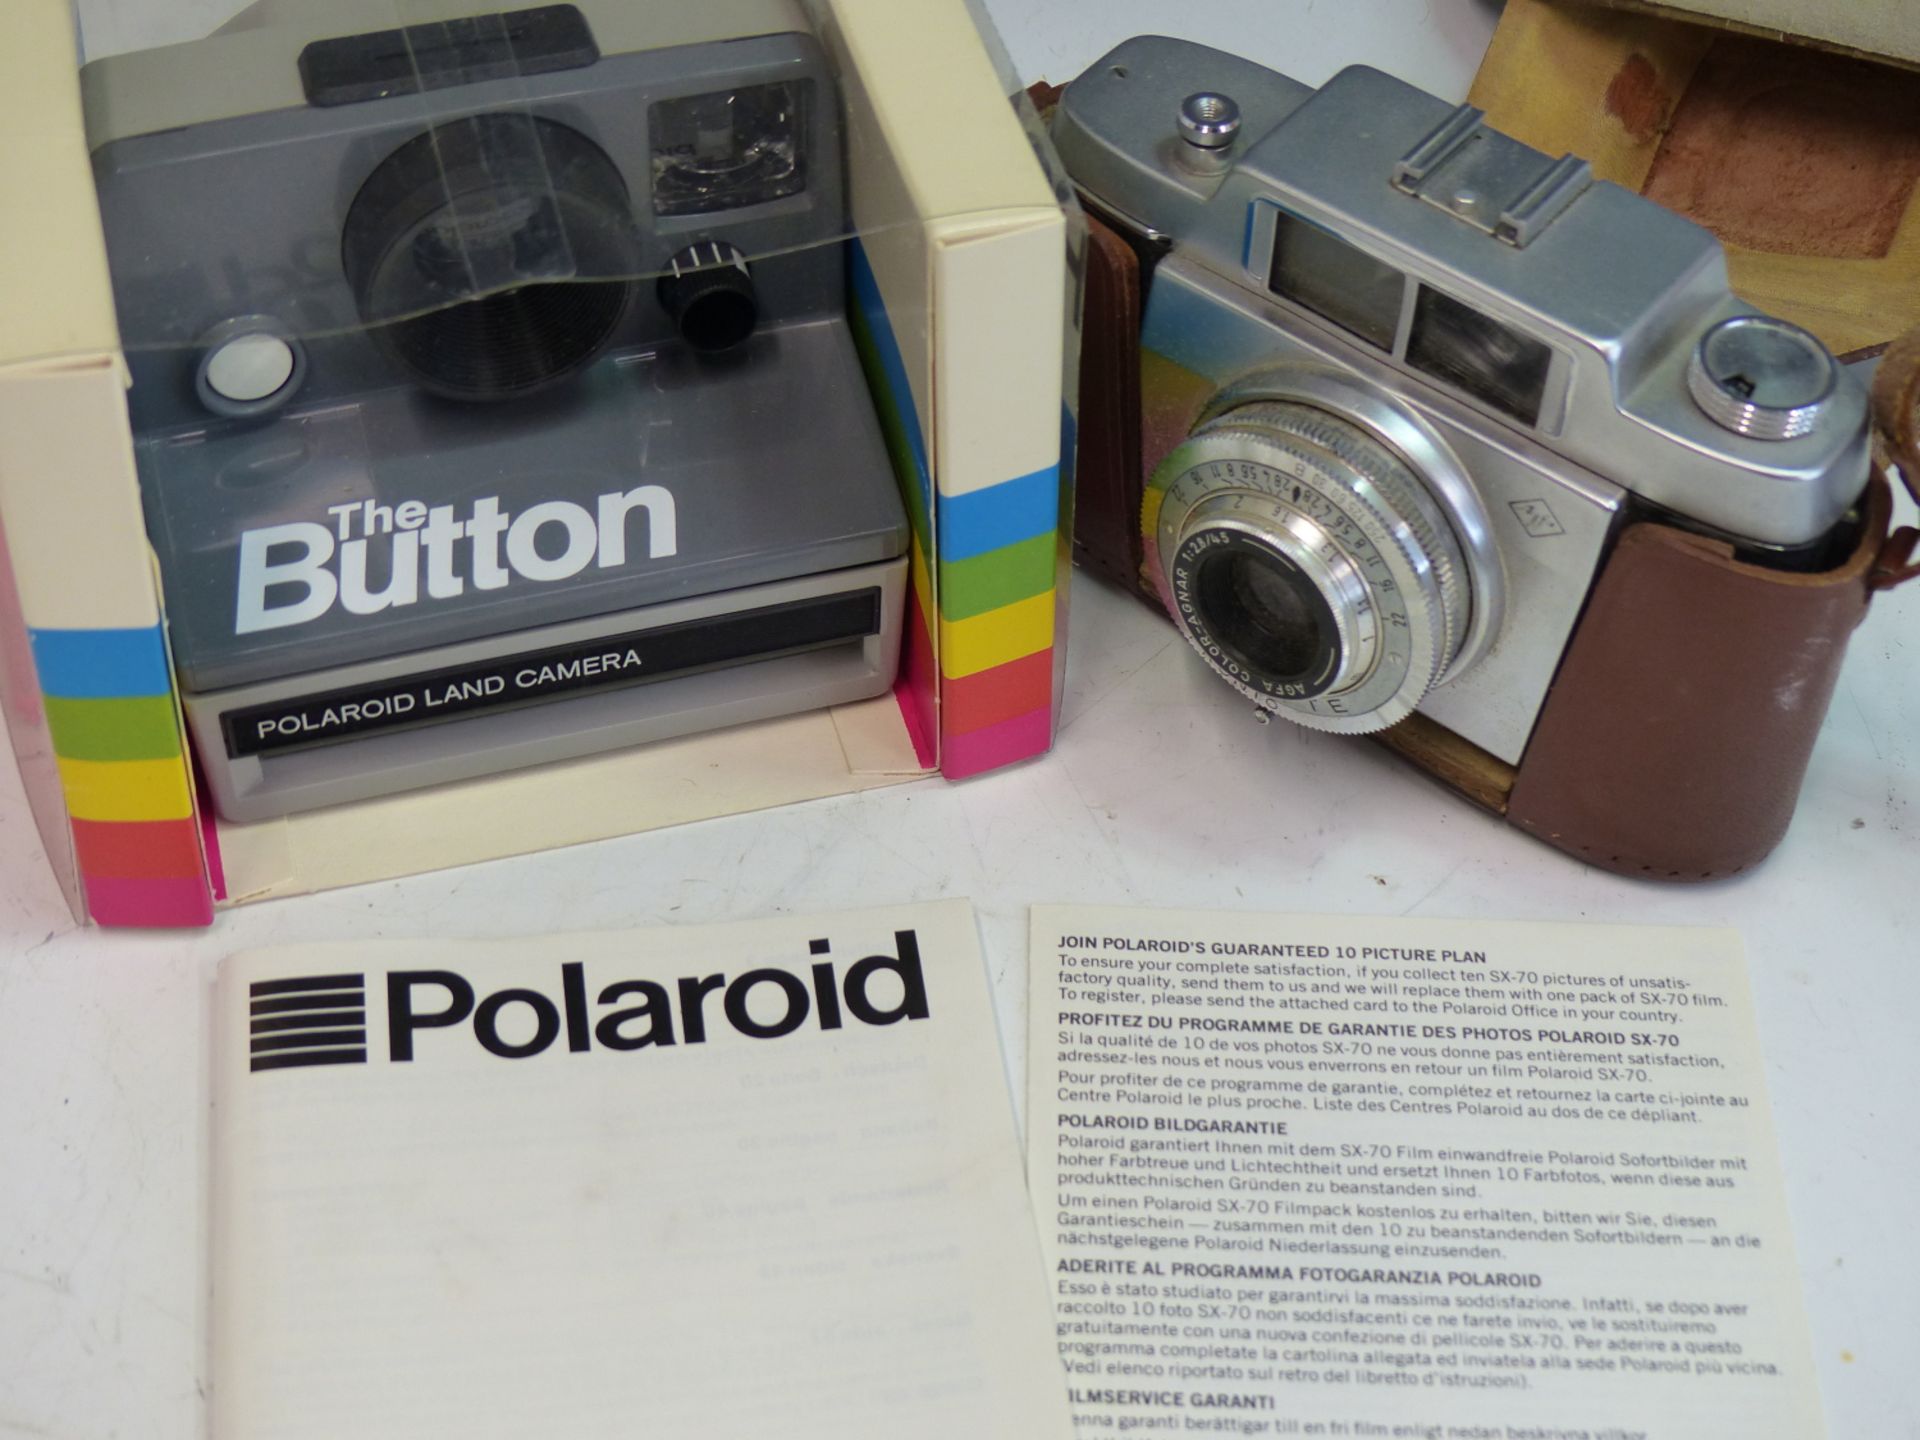 A POLAROID LAND CAMERA "THE BUTTON" IN ORIGINAL PACKAGING WITH MANUAL. TOGETHER WITH AN AGFA SILETTE - Image 3 of 3